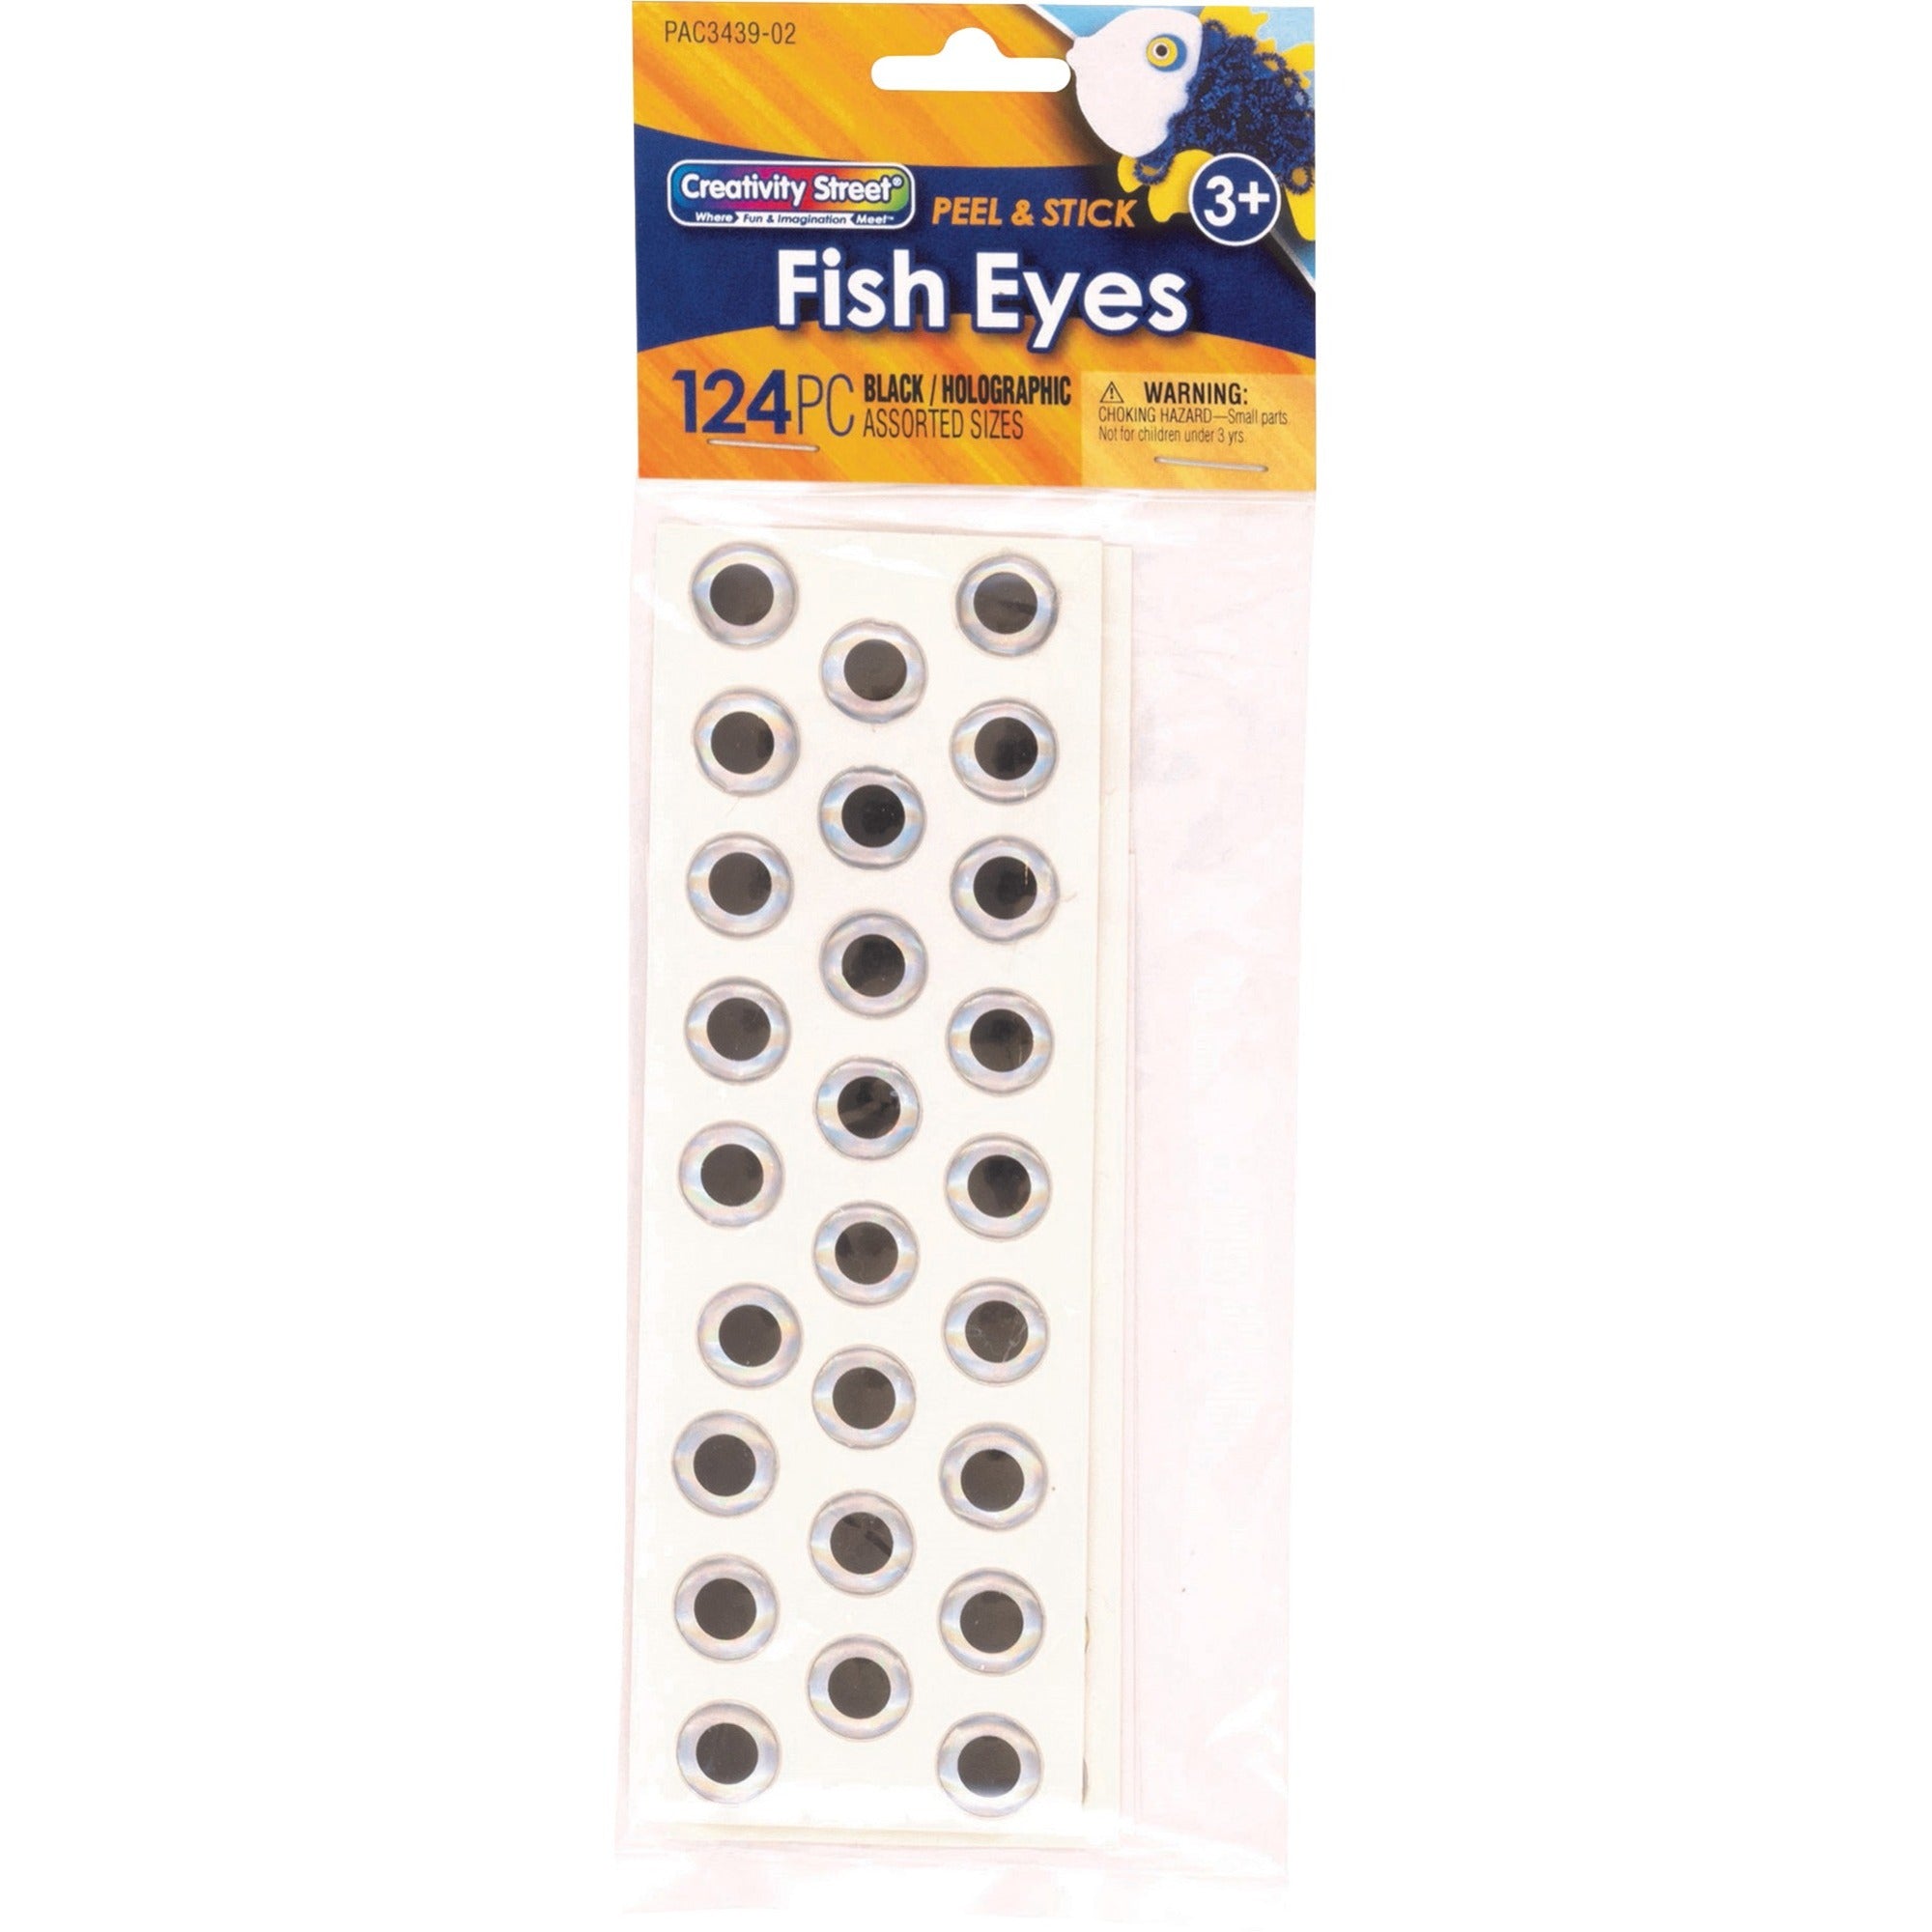 creativity-street-creativity-street-fish-eyes-puppet-art-project-craft-project-124-pack-black-clear_pacp343902 - 1